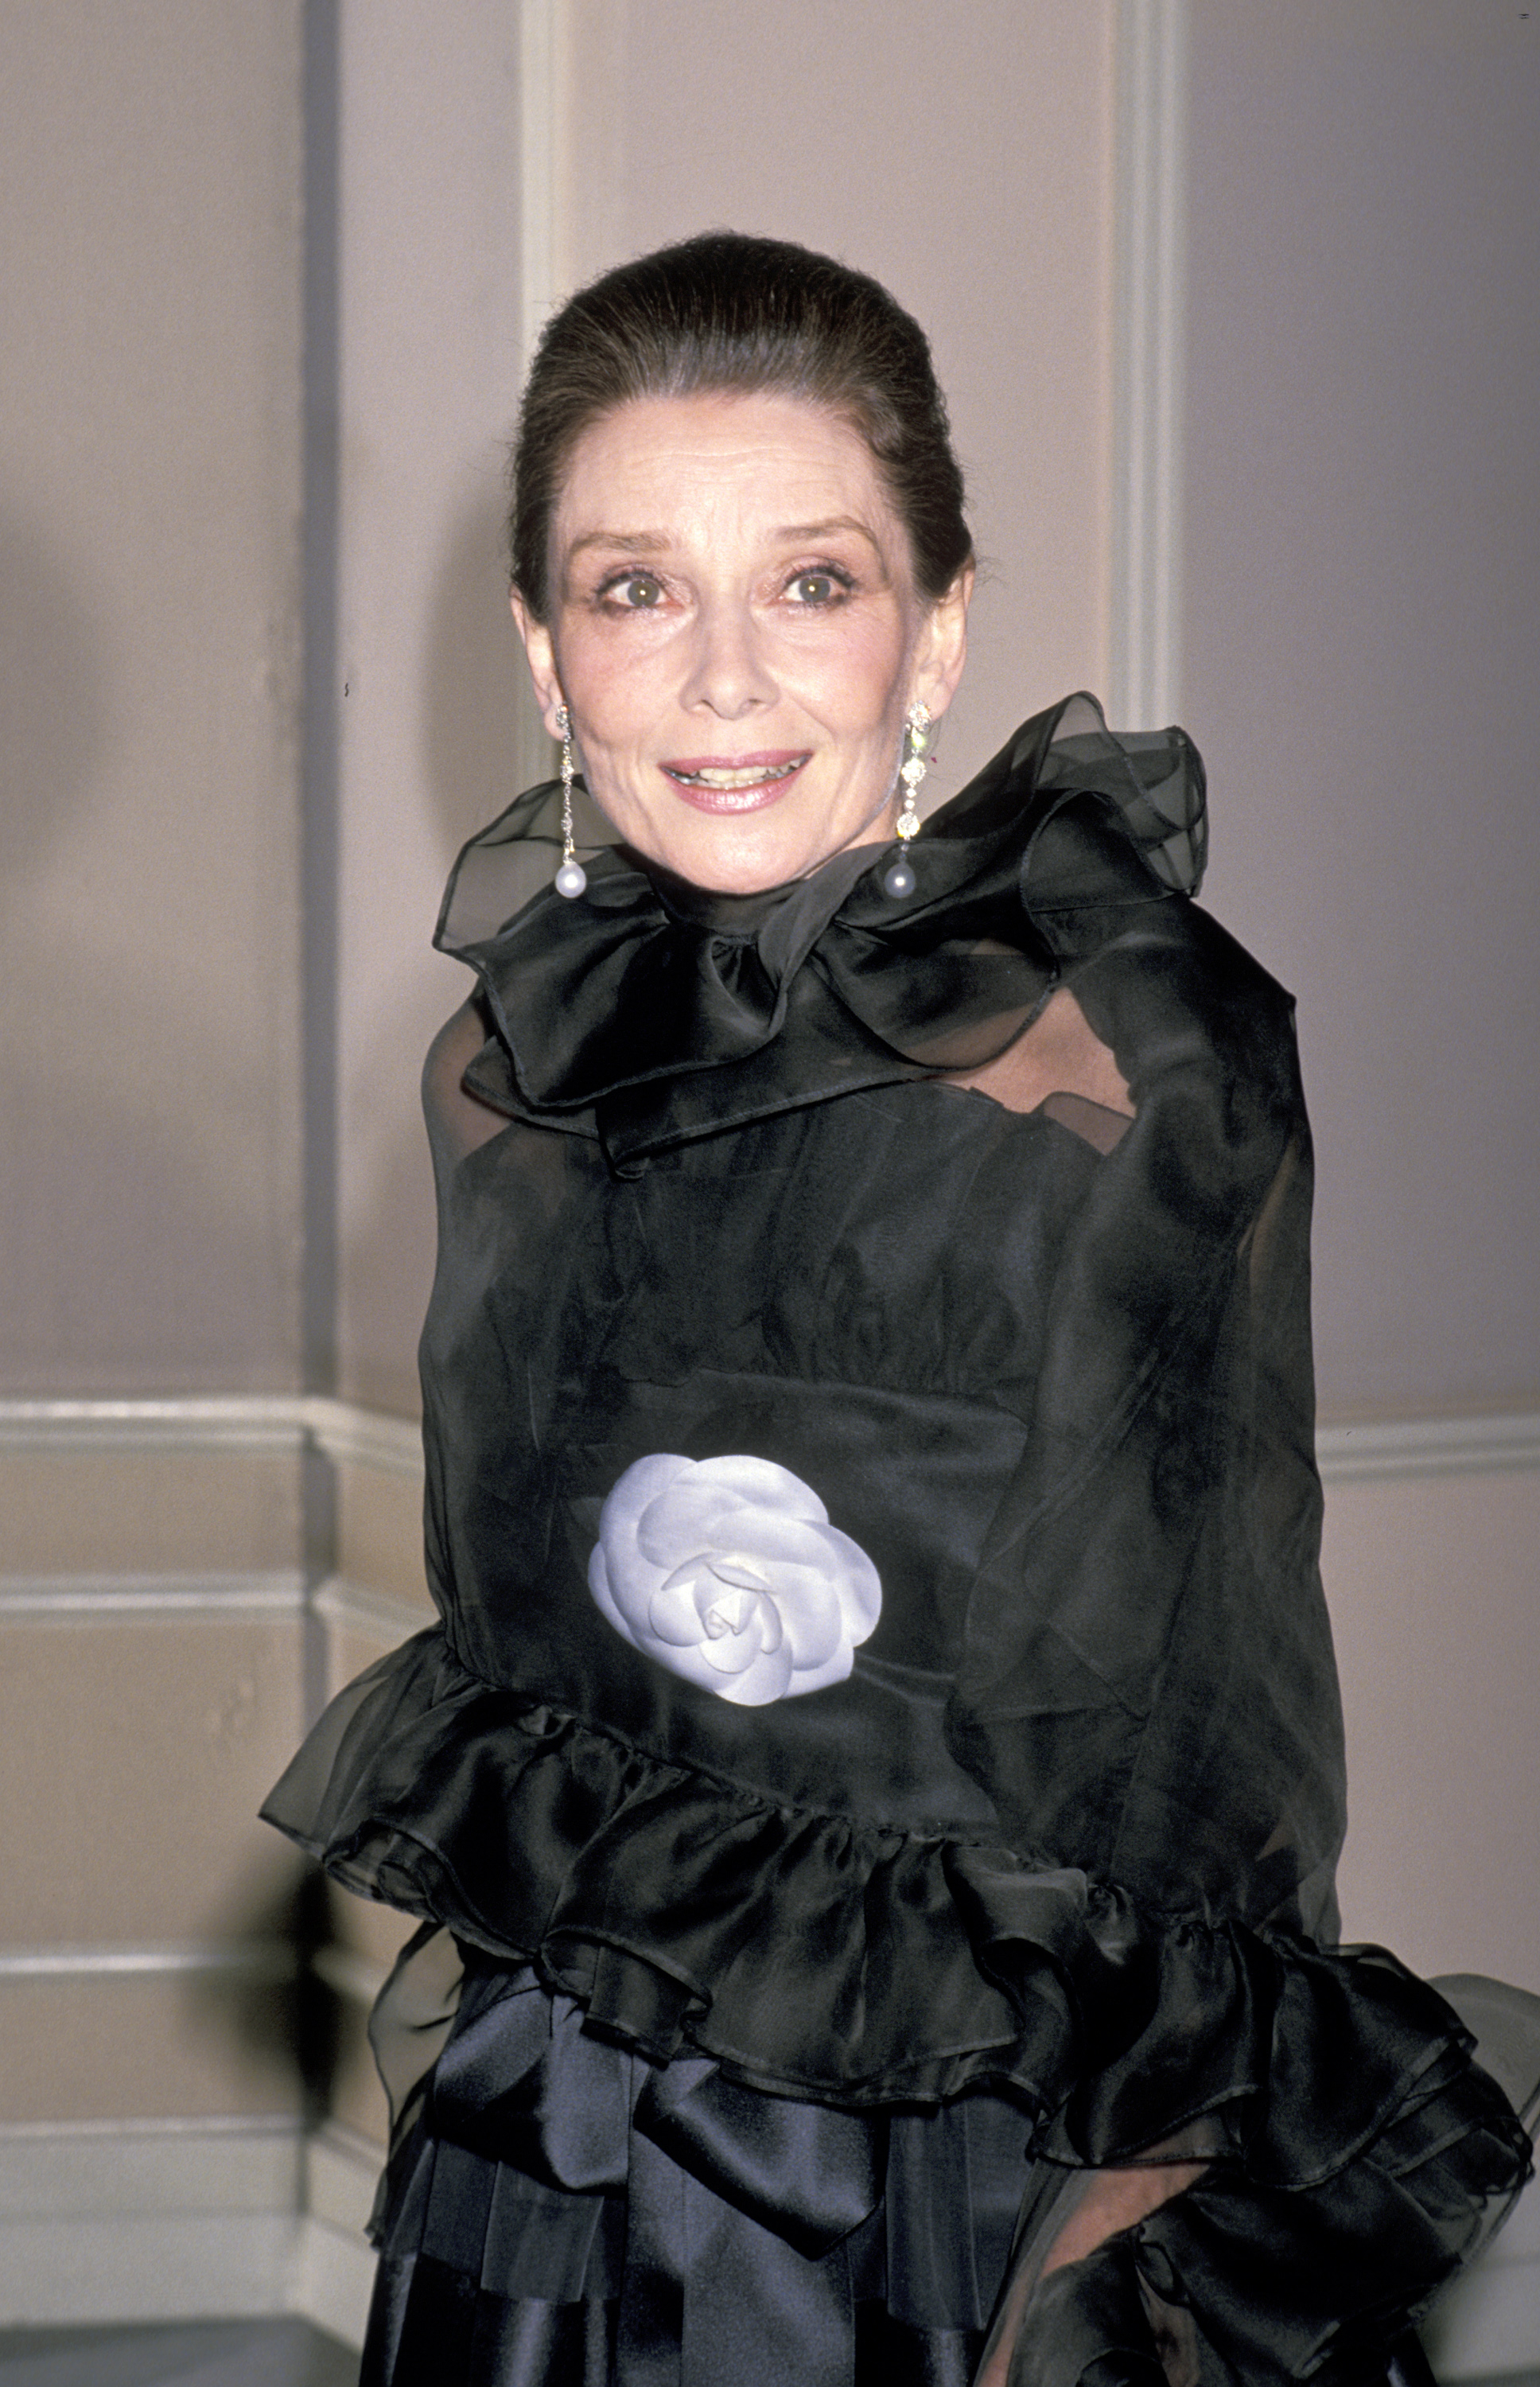 Close-up of Audrey smiling and wearing a floral-accented, frilly outfit